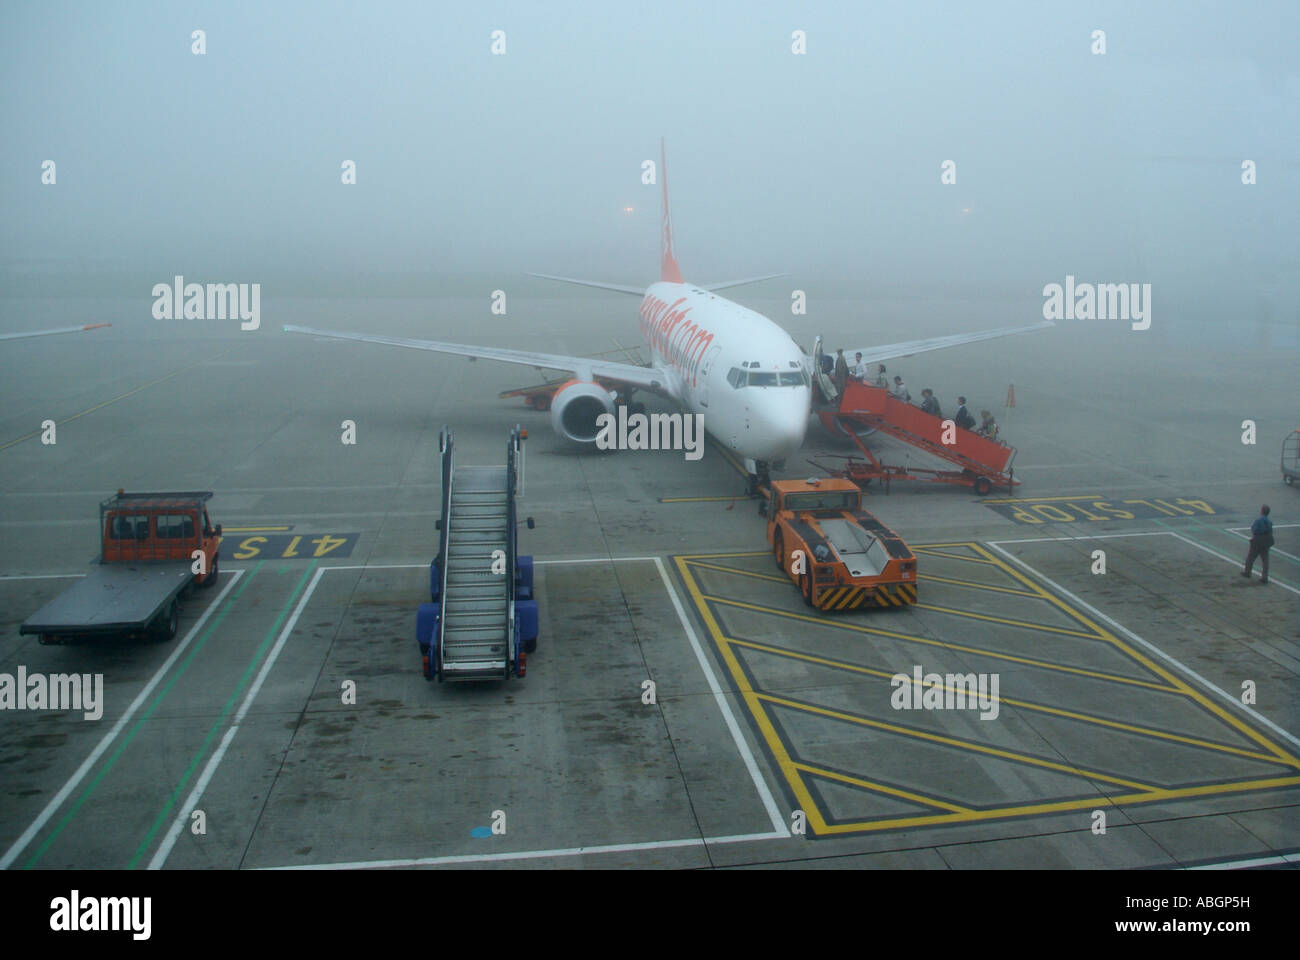 Luton airport fog lifting & passengers boarding Easyjet jet aircraft after weather delayed taking off schedules due to poor visibility Bedfordshire UK Stock Photo